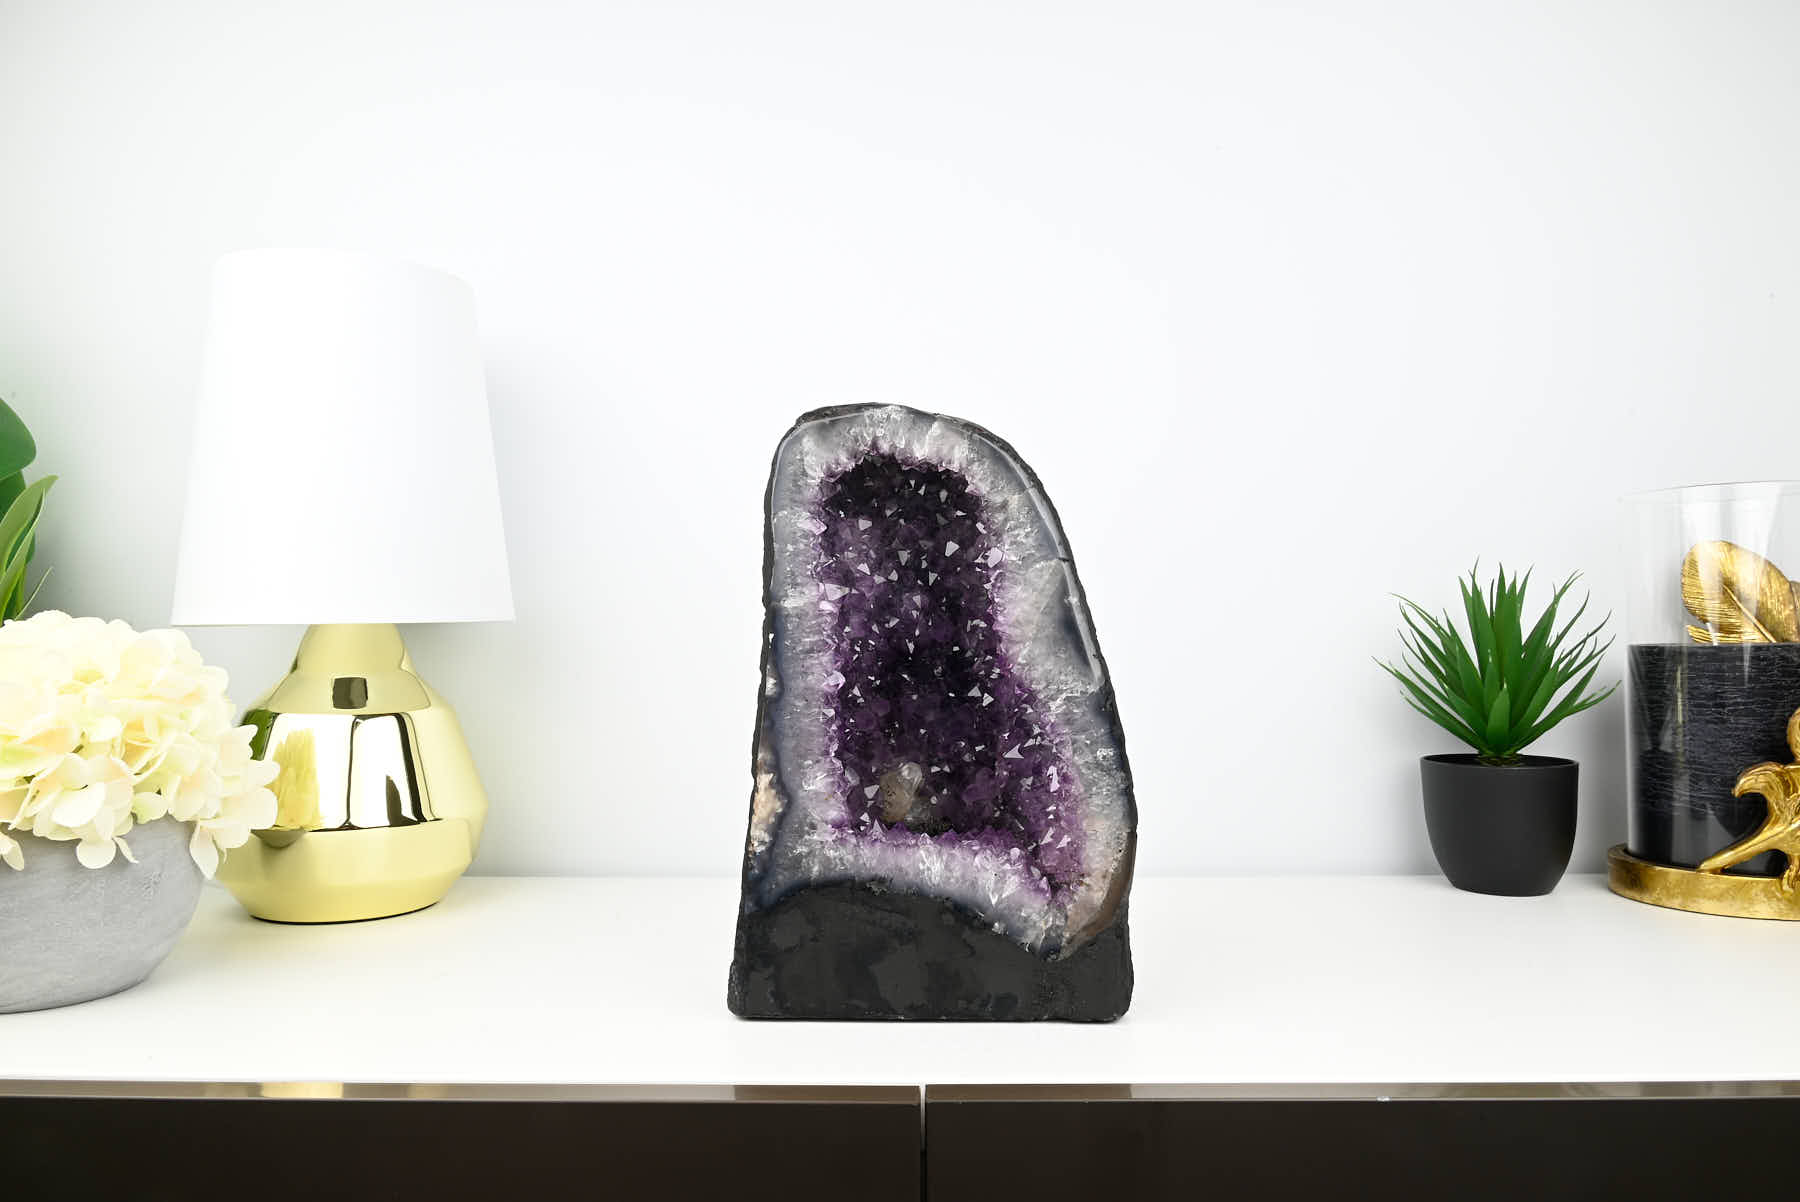 Extra Quality Amethyst Cathedral - 8.28kg, 28cm tall - #CAAMET-10030